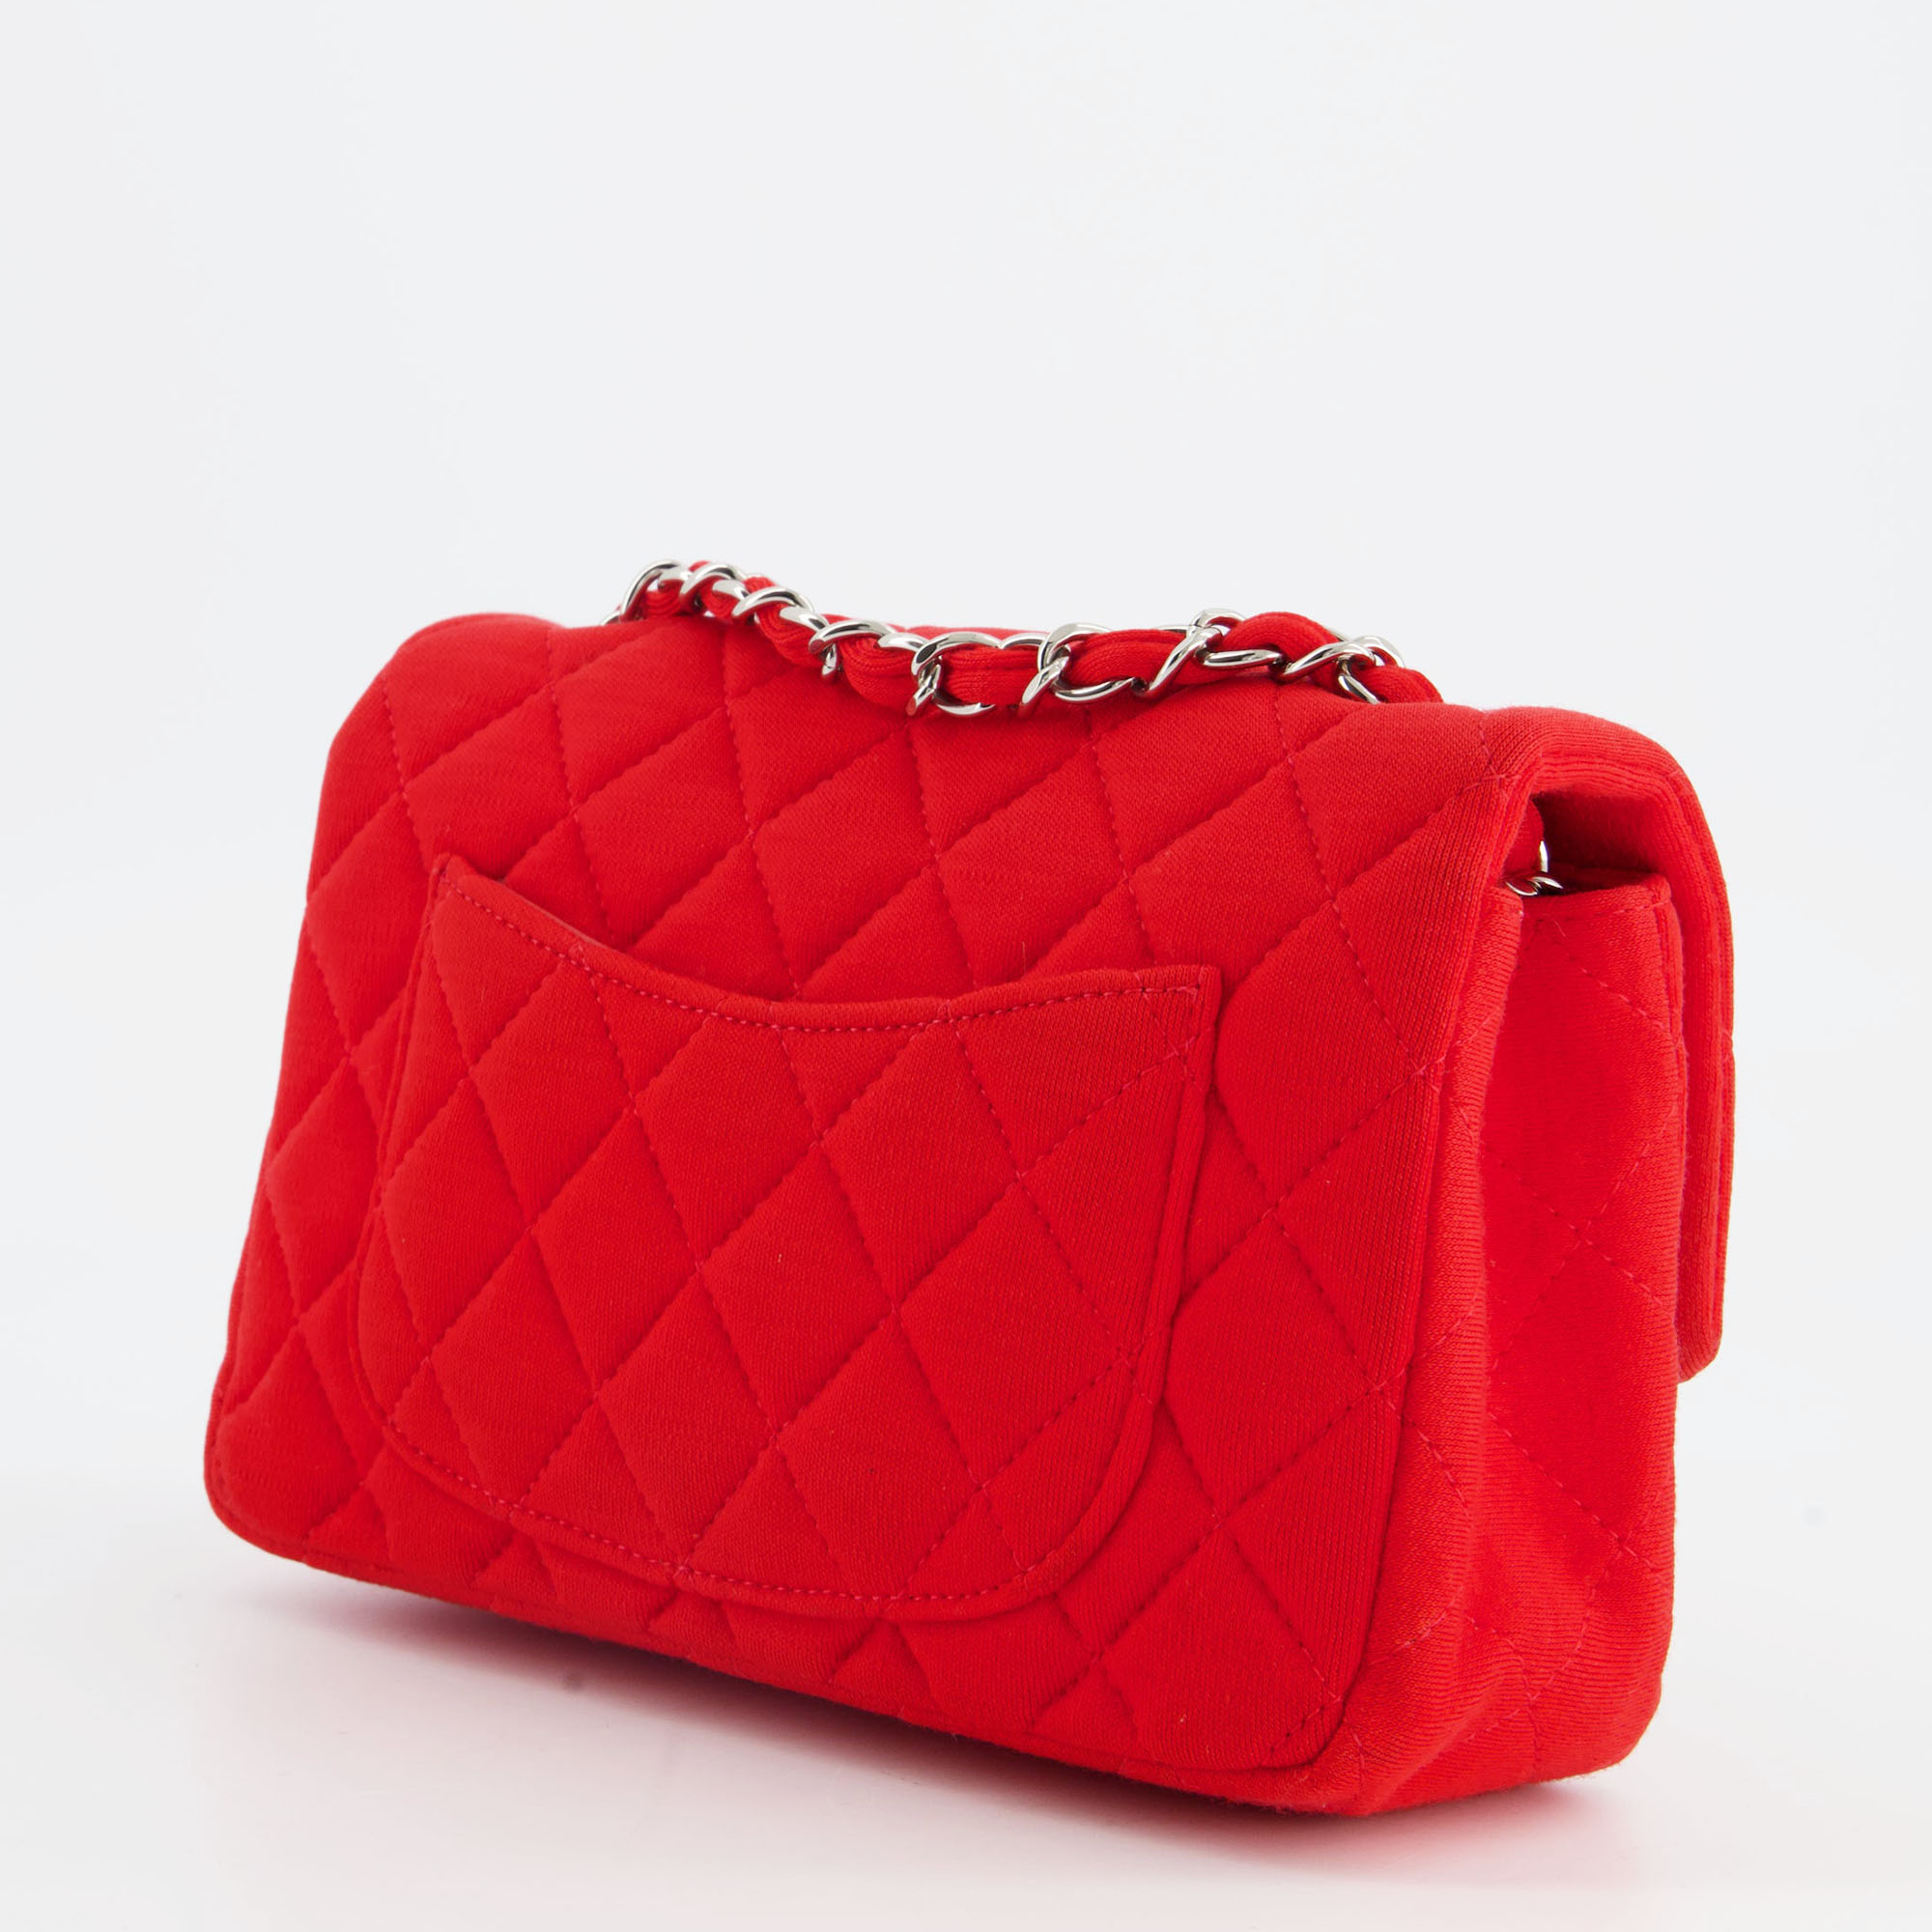 Chanel Red Jersey Mini Rectangular Flap Bag With Silver Hardware